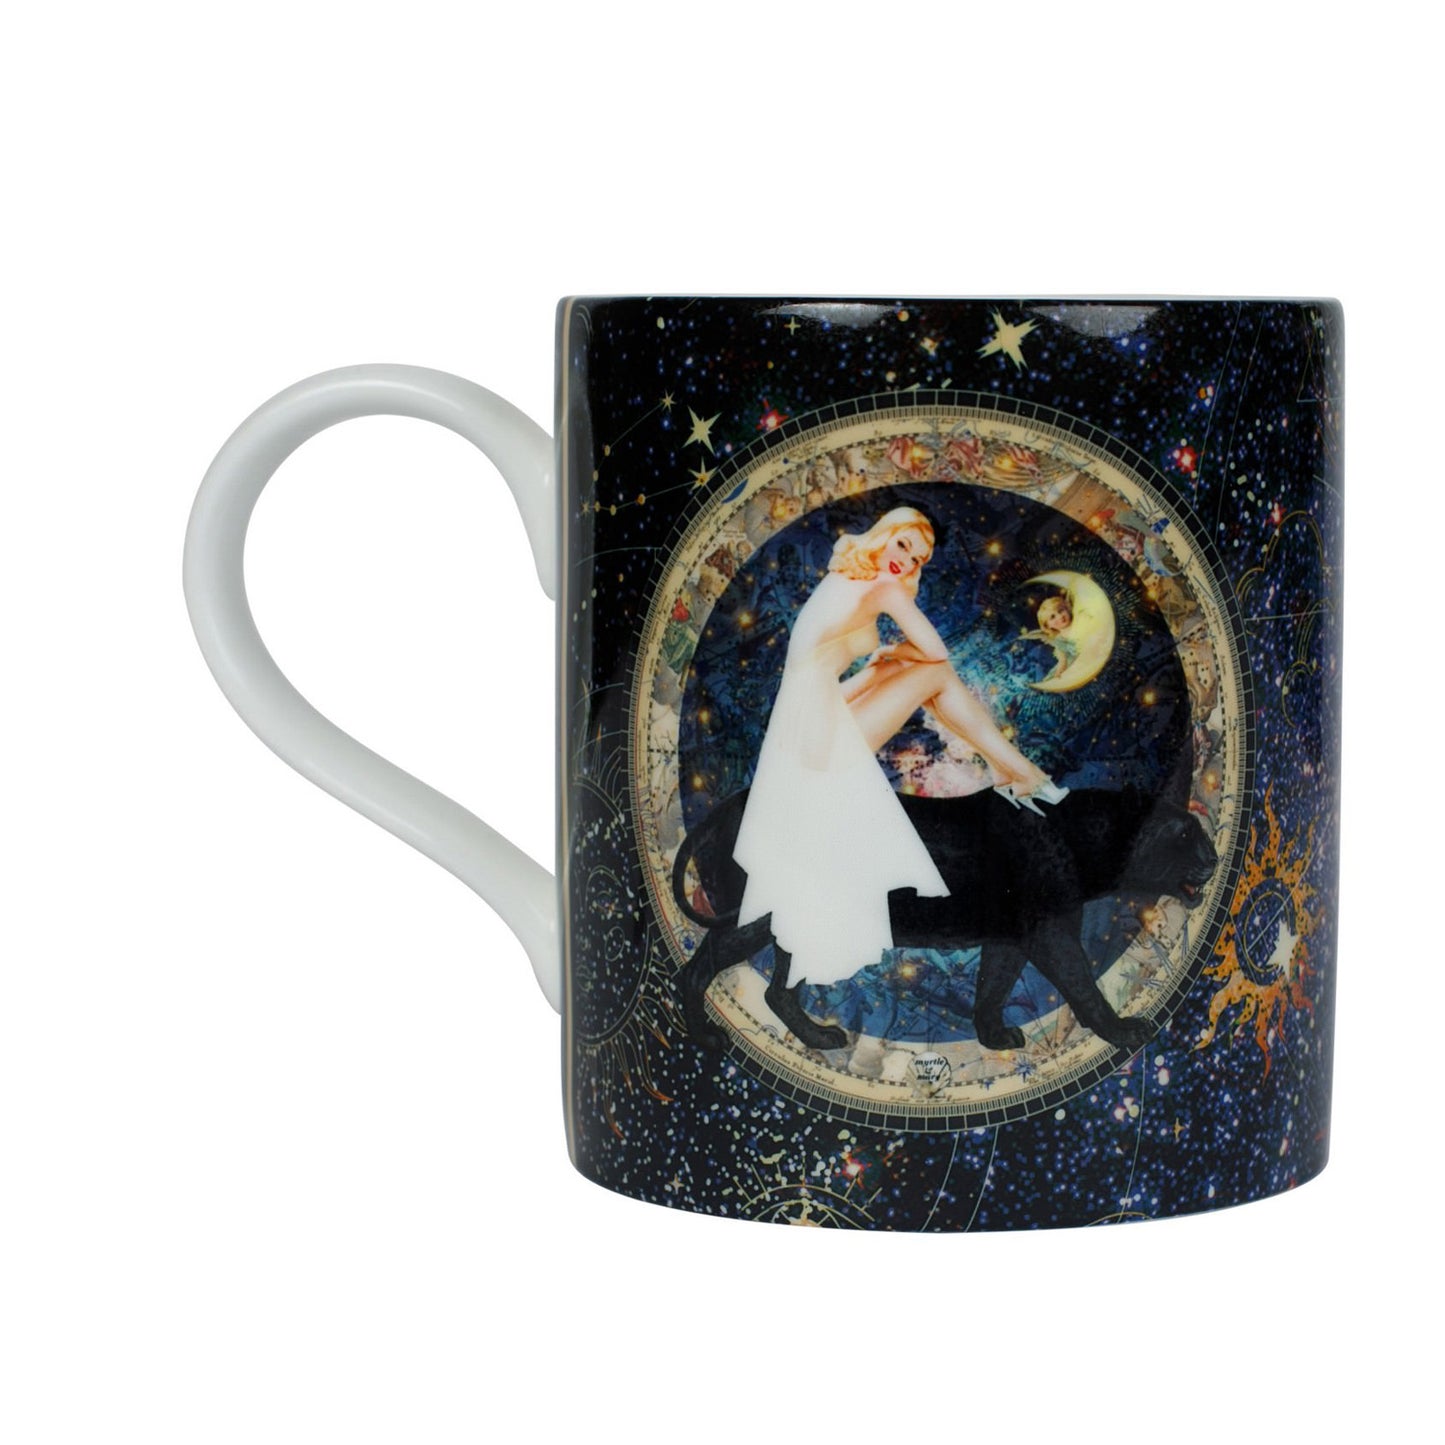 Luxury bone china coffee cup in a maximalist astrology design called - Celeste